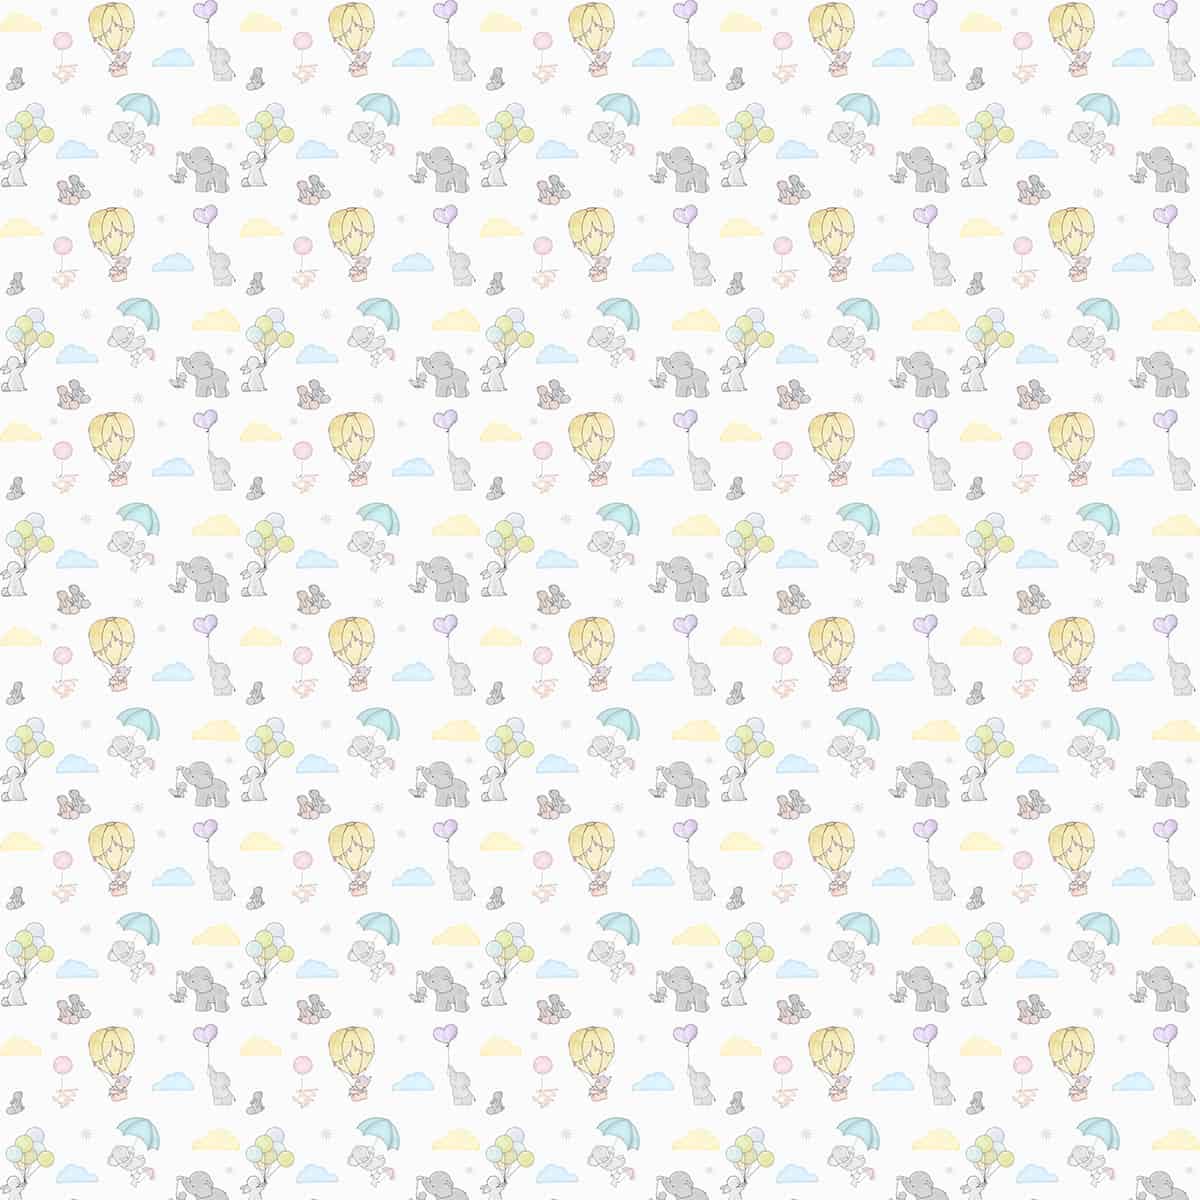 Tiny Trunks and Floppy Ears, Cute Wallpaper for Rooms, Multicolor